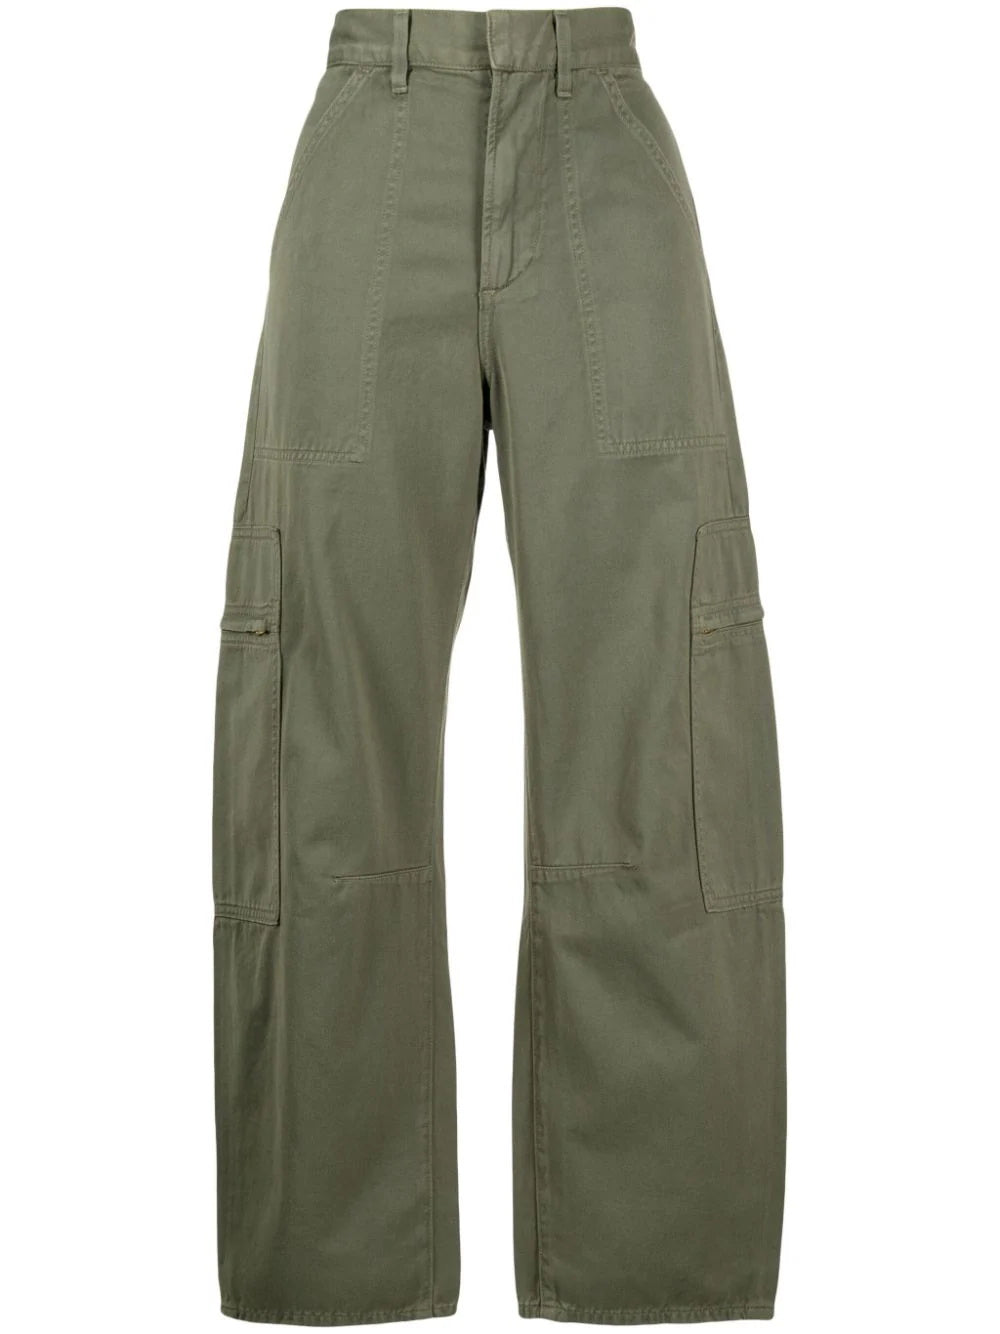 Citizens of Humanity 'Marcelle' Low Slung Cargo Trousers – Bernard Boutique